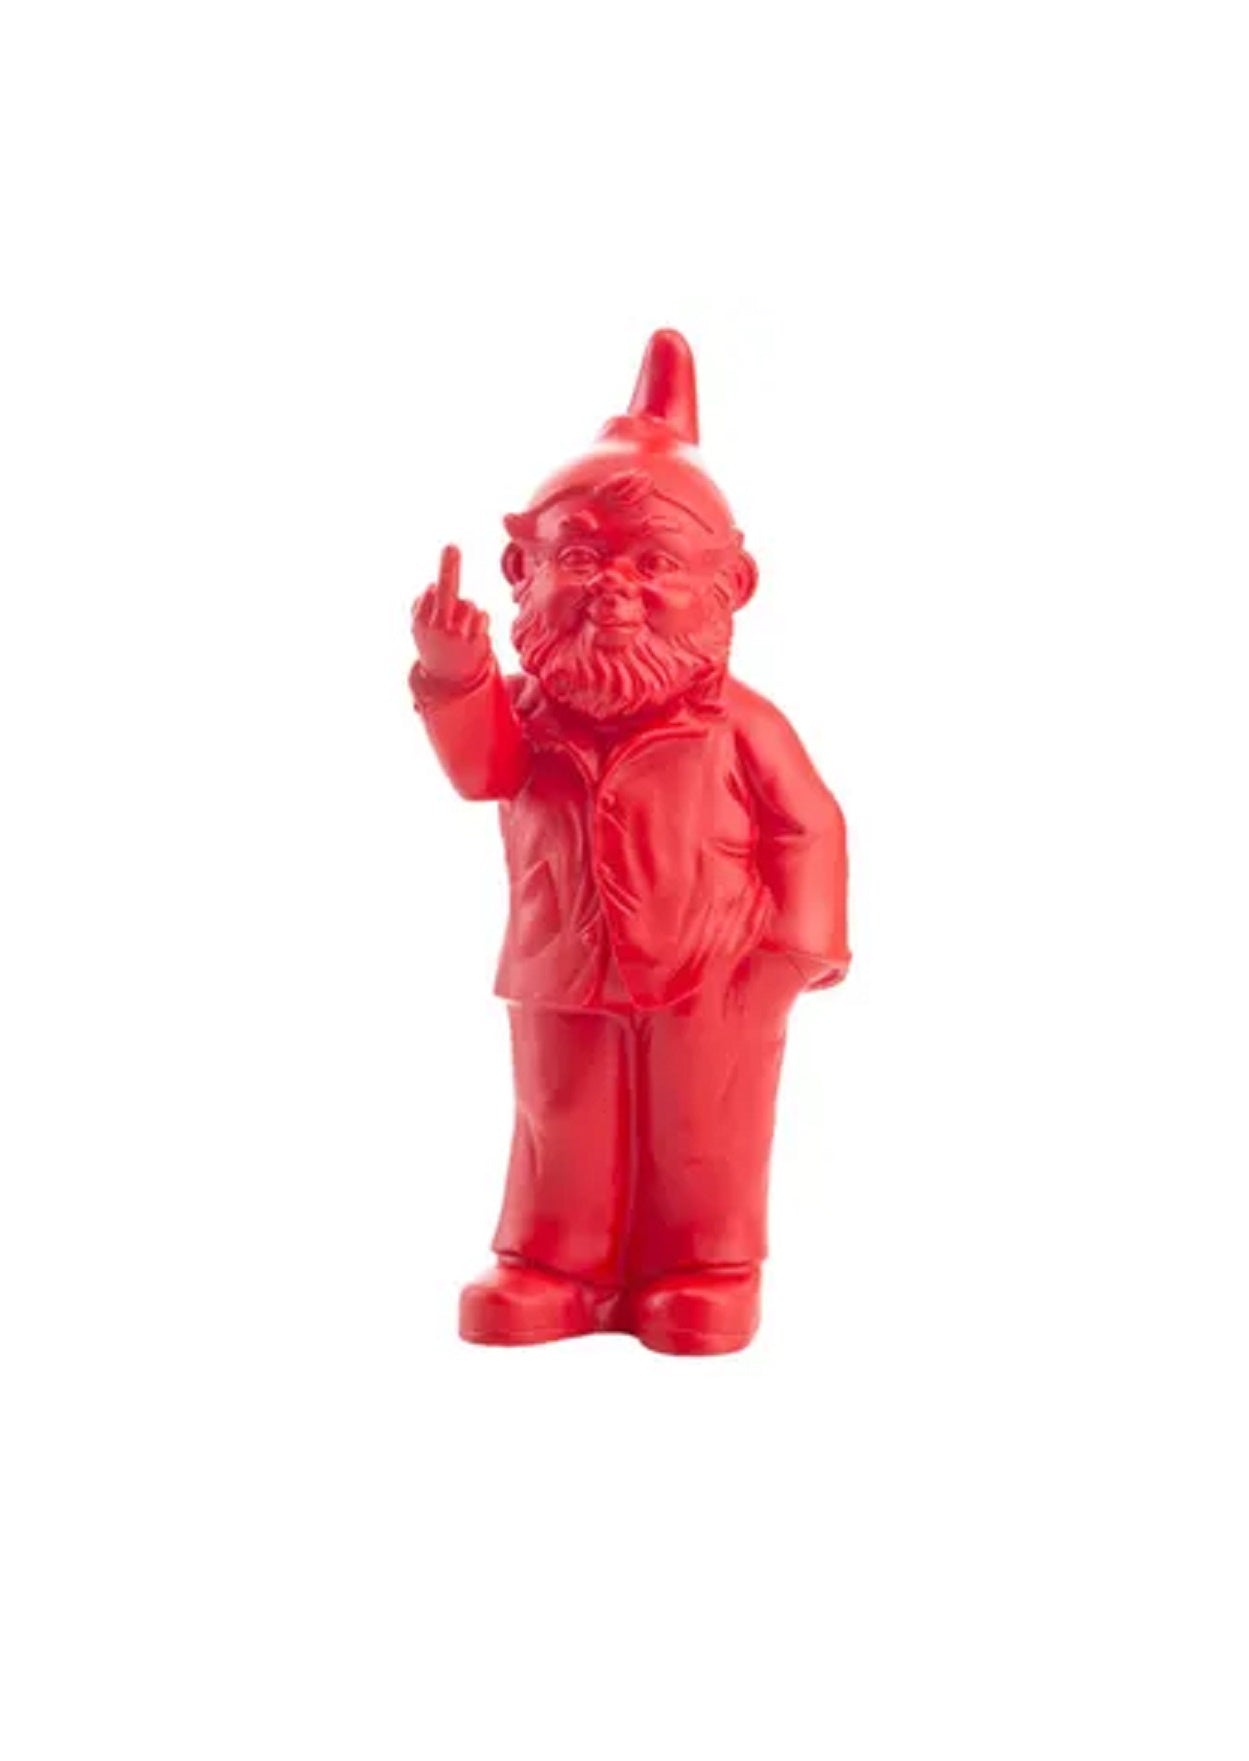 Resin Pop Gnome Red